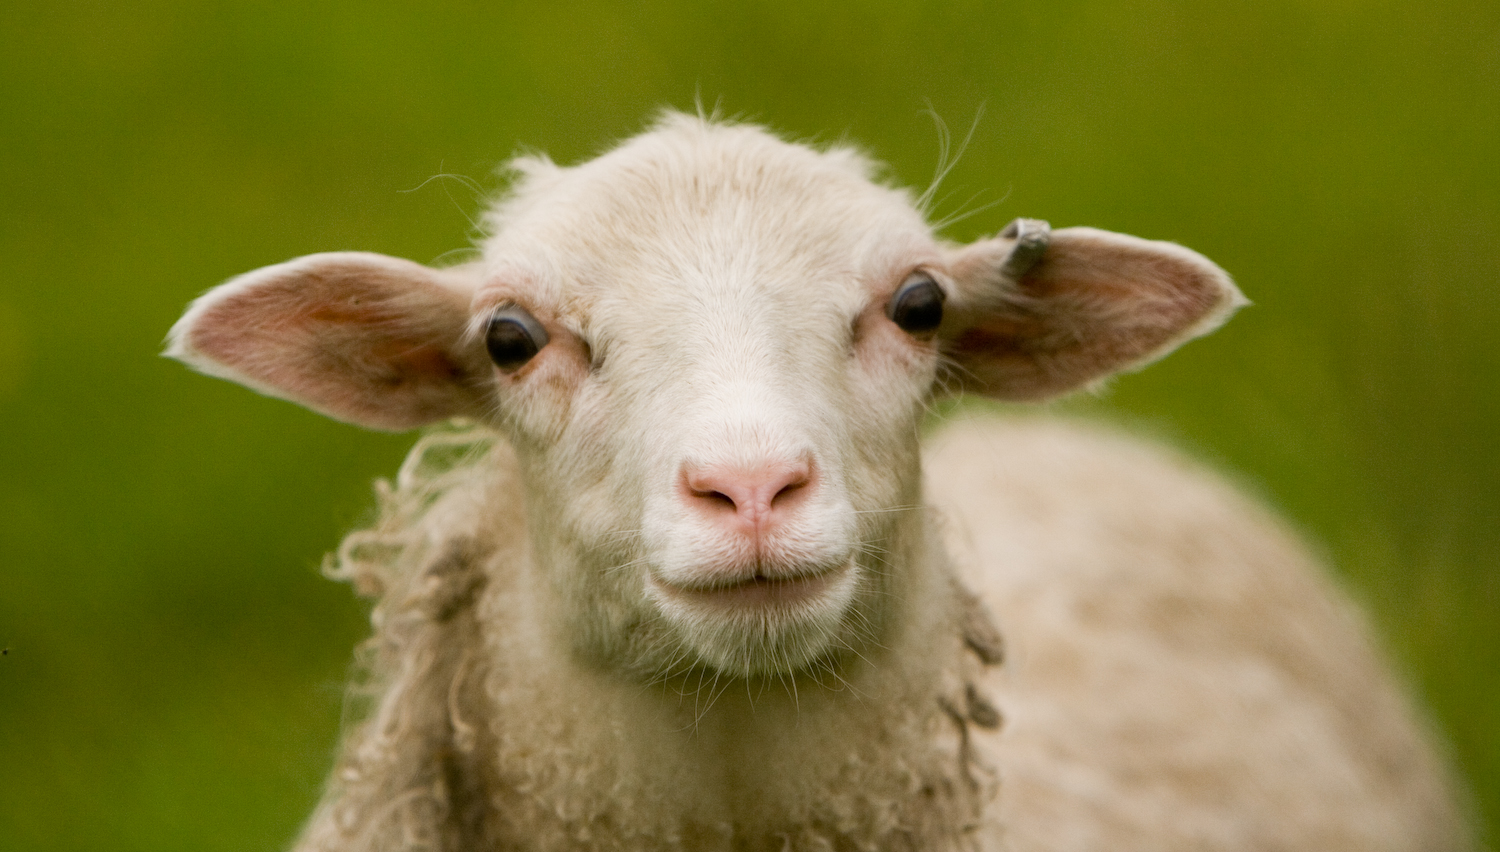 a white sheep with very dark eyes looking at the camera